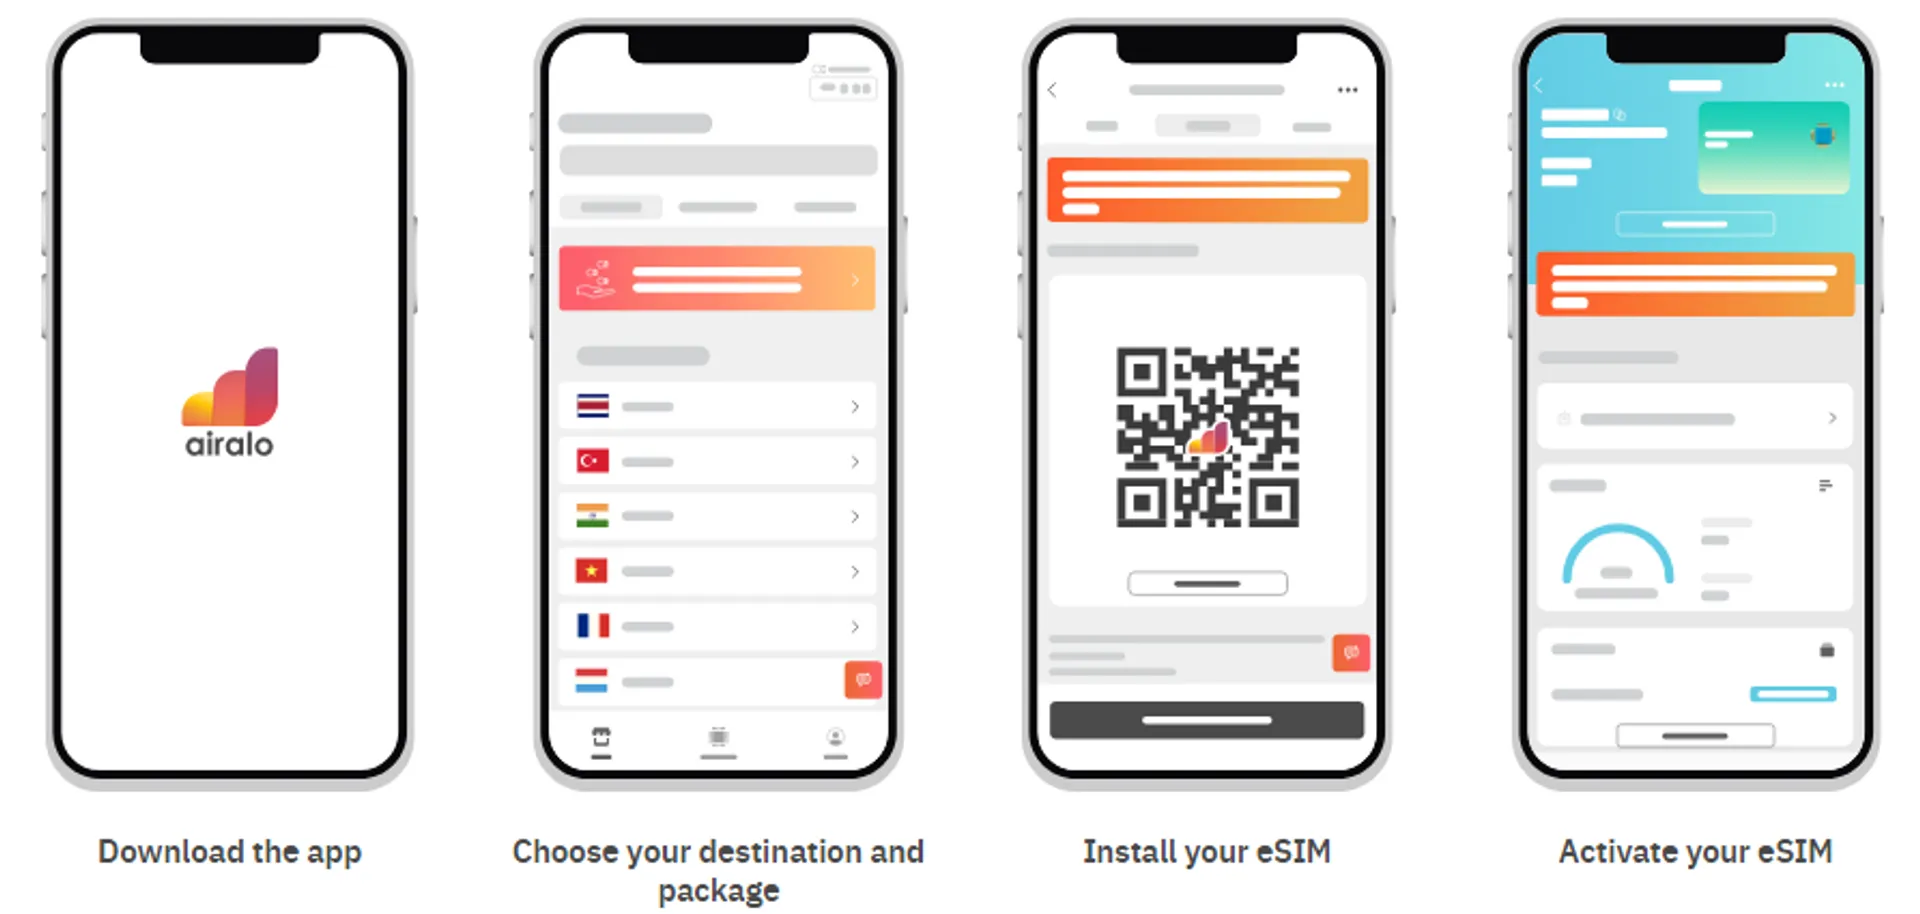 Airalo is the world’s first eSIM store....With eSIMs from Airalo, travelers can download and install a digital data pack for over 200 countries/regions and get connected anywhere in the world as soon as they land.
#eSIM #travelpayouts #Airalo
Stay connected, wherever you travel, at affordable rates :https://bit.ly/3KzVmpp